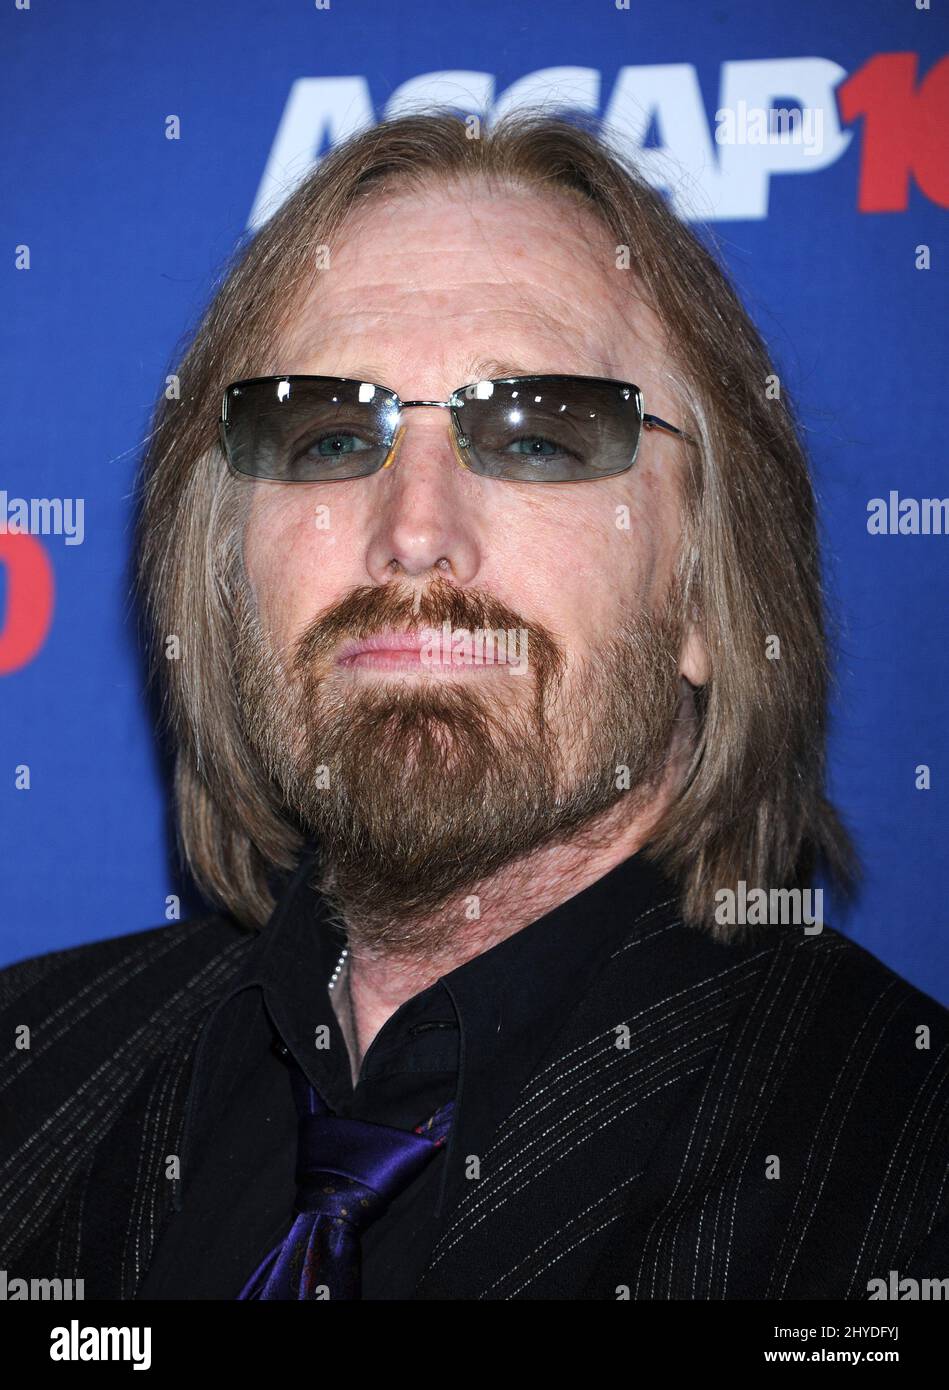 April 23, 2014 Hollywood, Ca. Tom Petty 31st annual ASCAP Pop Music Awards held in the Dolby Ballroom at Loews Hollywood Hotel Stock Photo